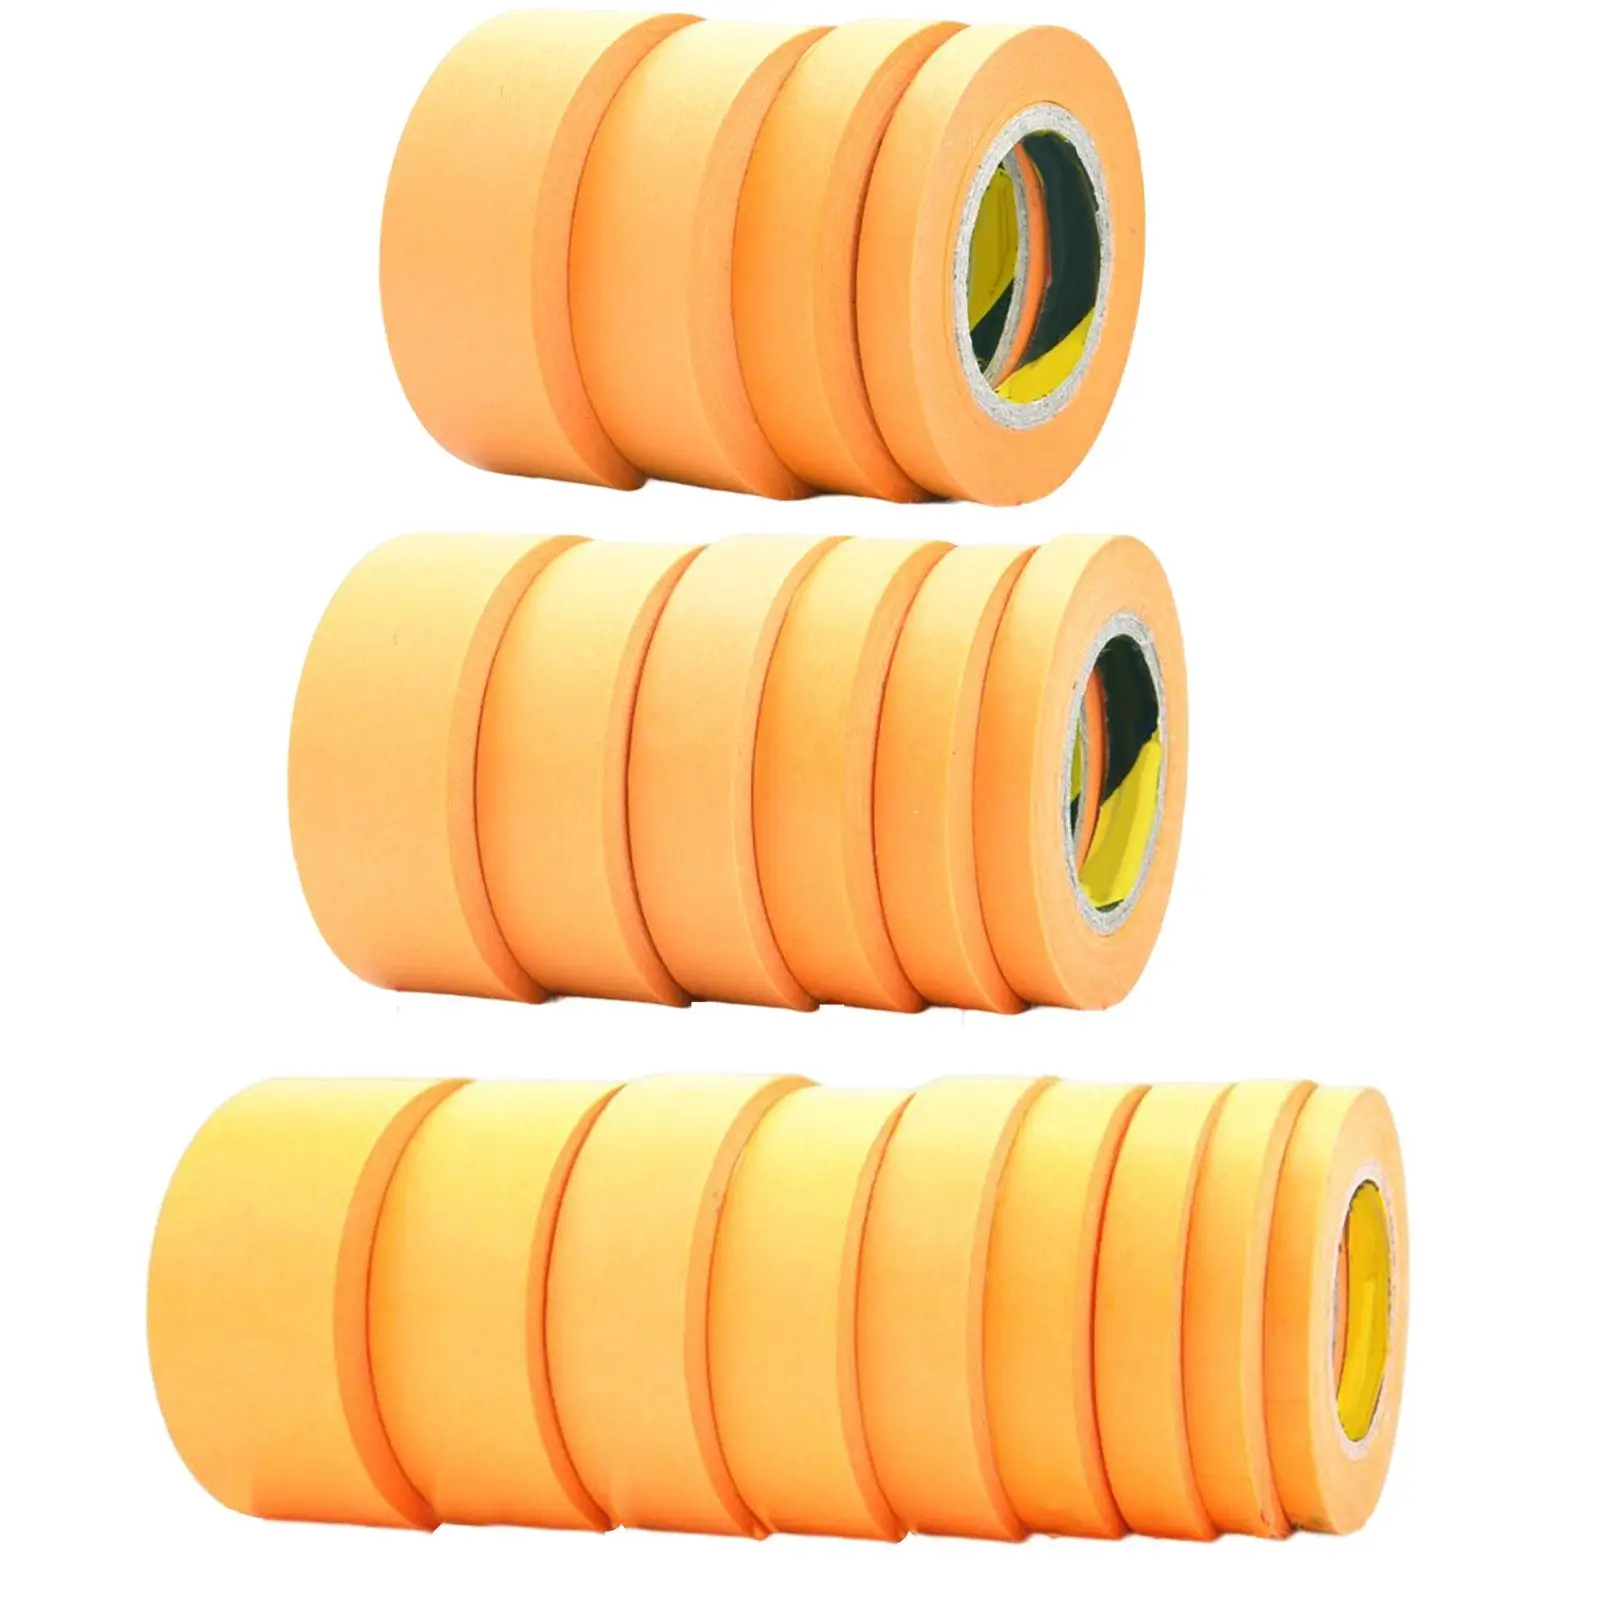 Pinstripe Tape Masking Covers Tape Multi Size Model Making Tape Painting Model Masking Tape Painters Tape for Painting Drawing